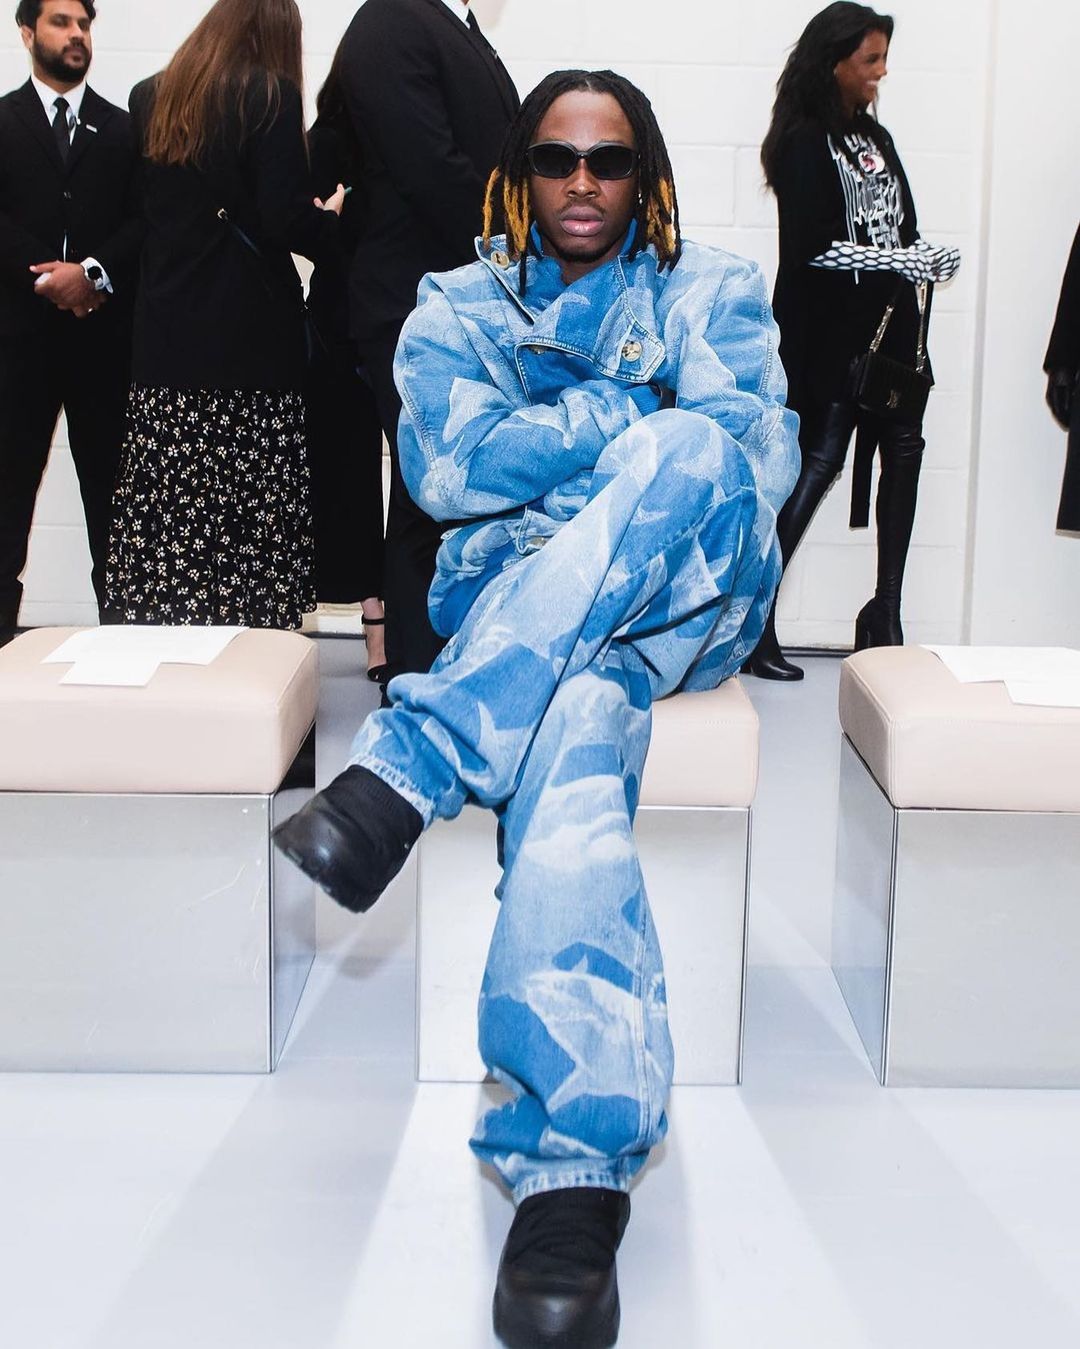 UpscaleHype - Tyga wears a Louis Vuitton by Virgil Abloh Jacket, Sunglasses  and Sneakers  -by-virgil-abloh-jacket-sunglasses-and-sneakers/ - UpscaleHype